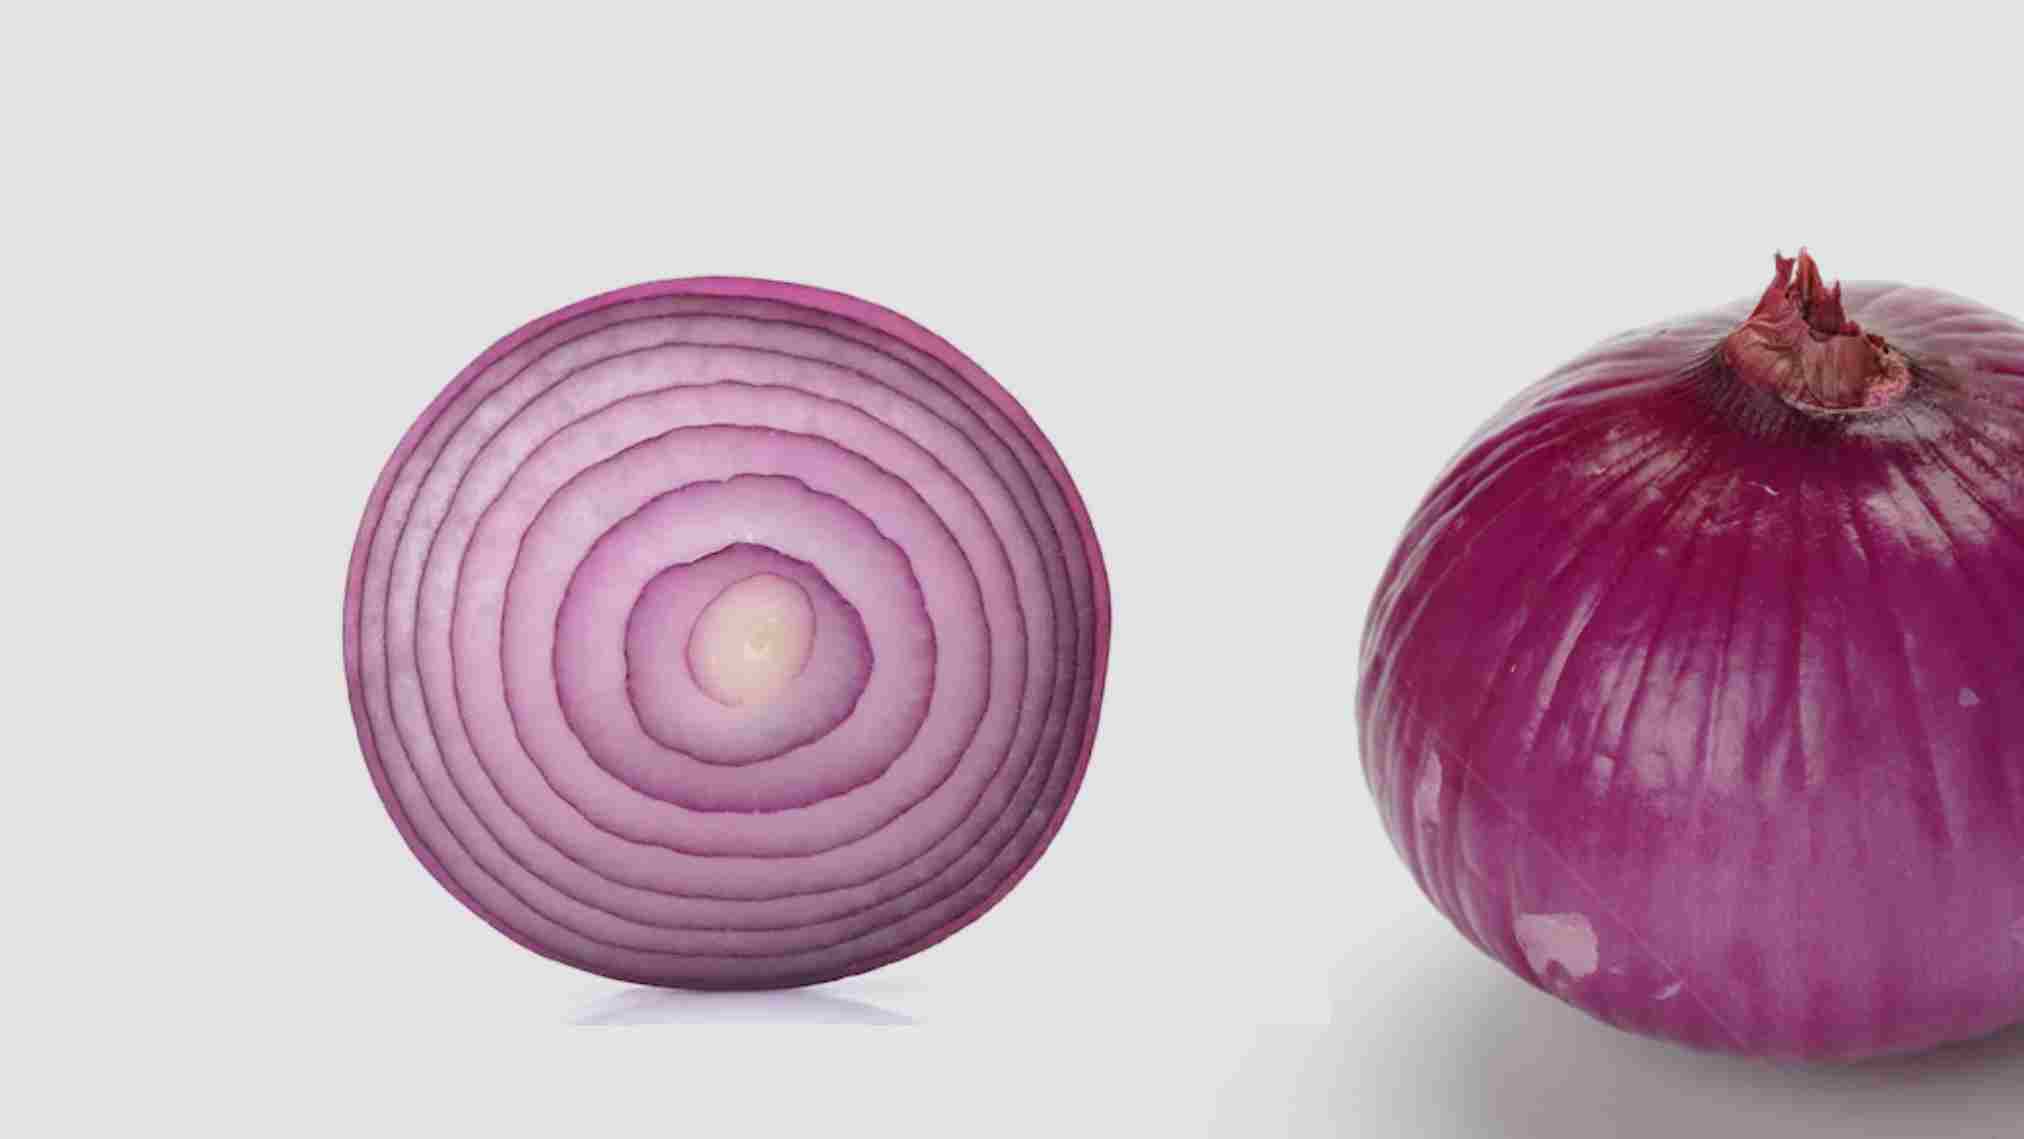 Spiritual Meaning of Smelling Onions